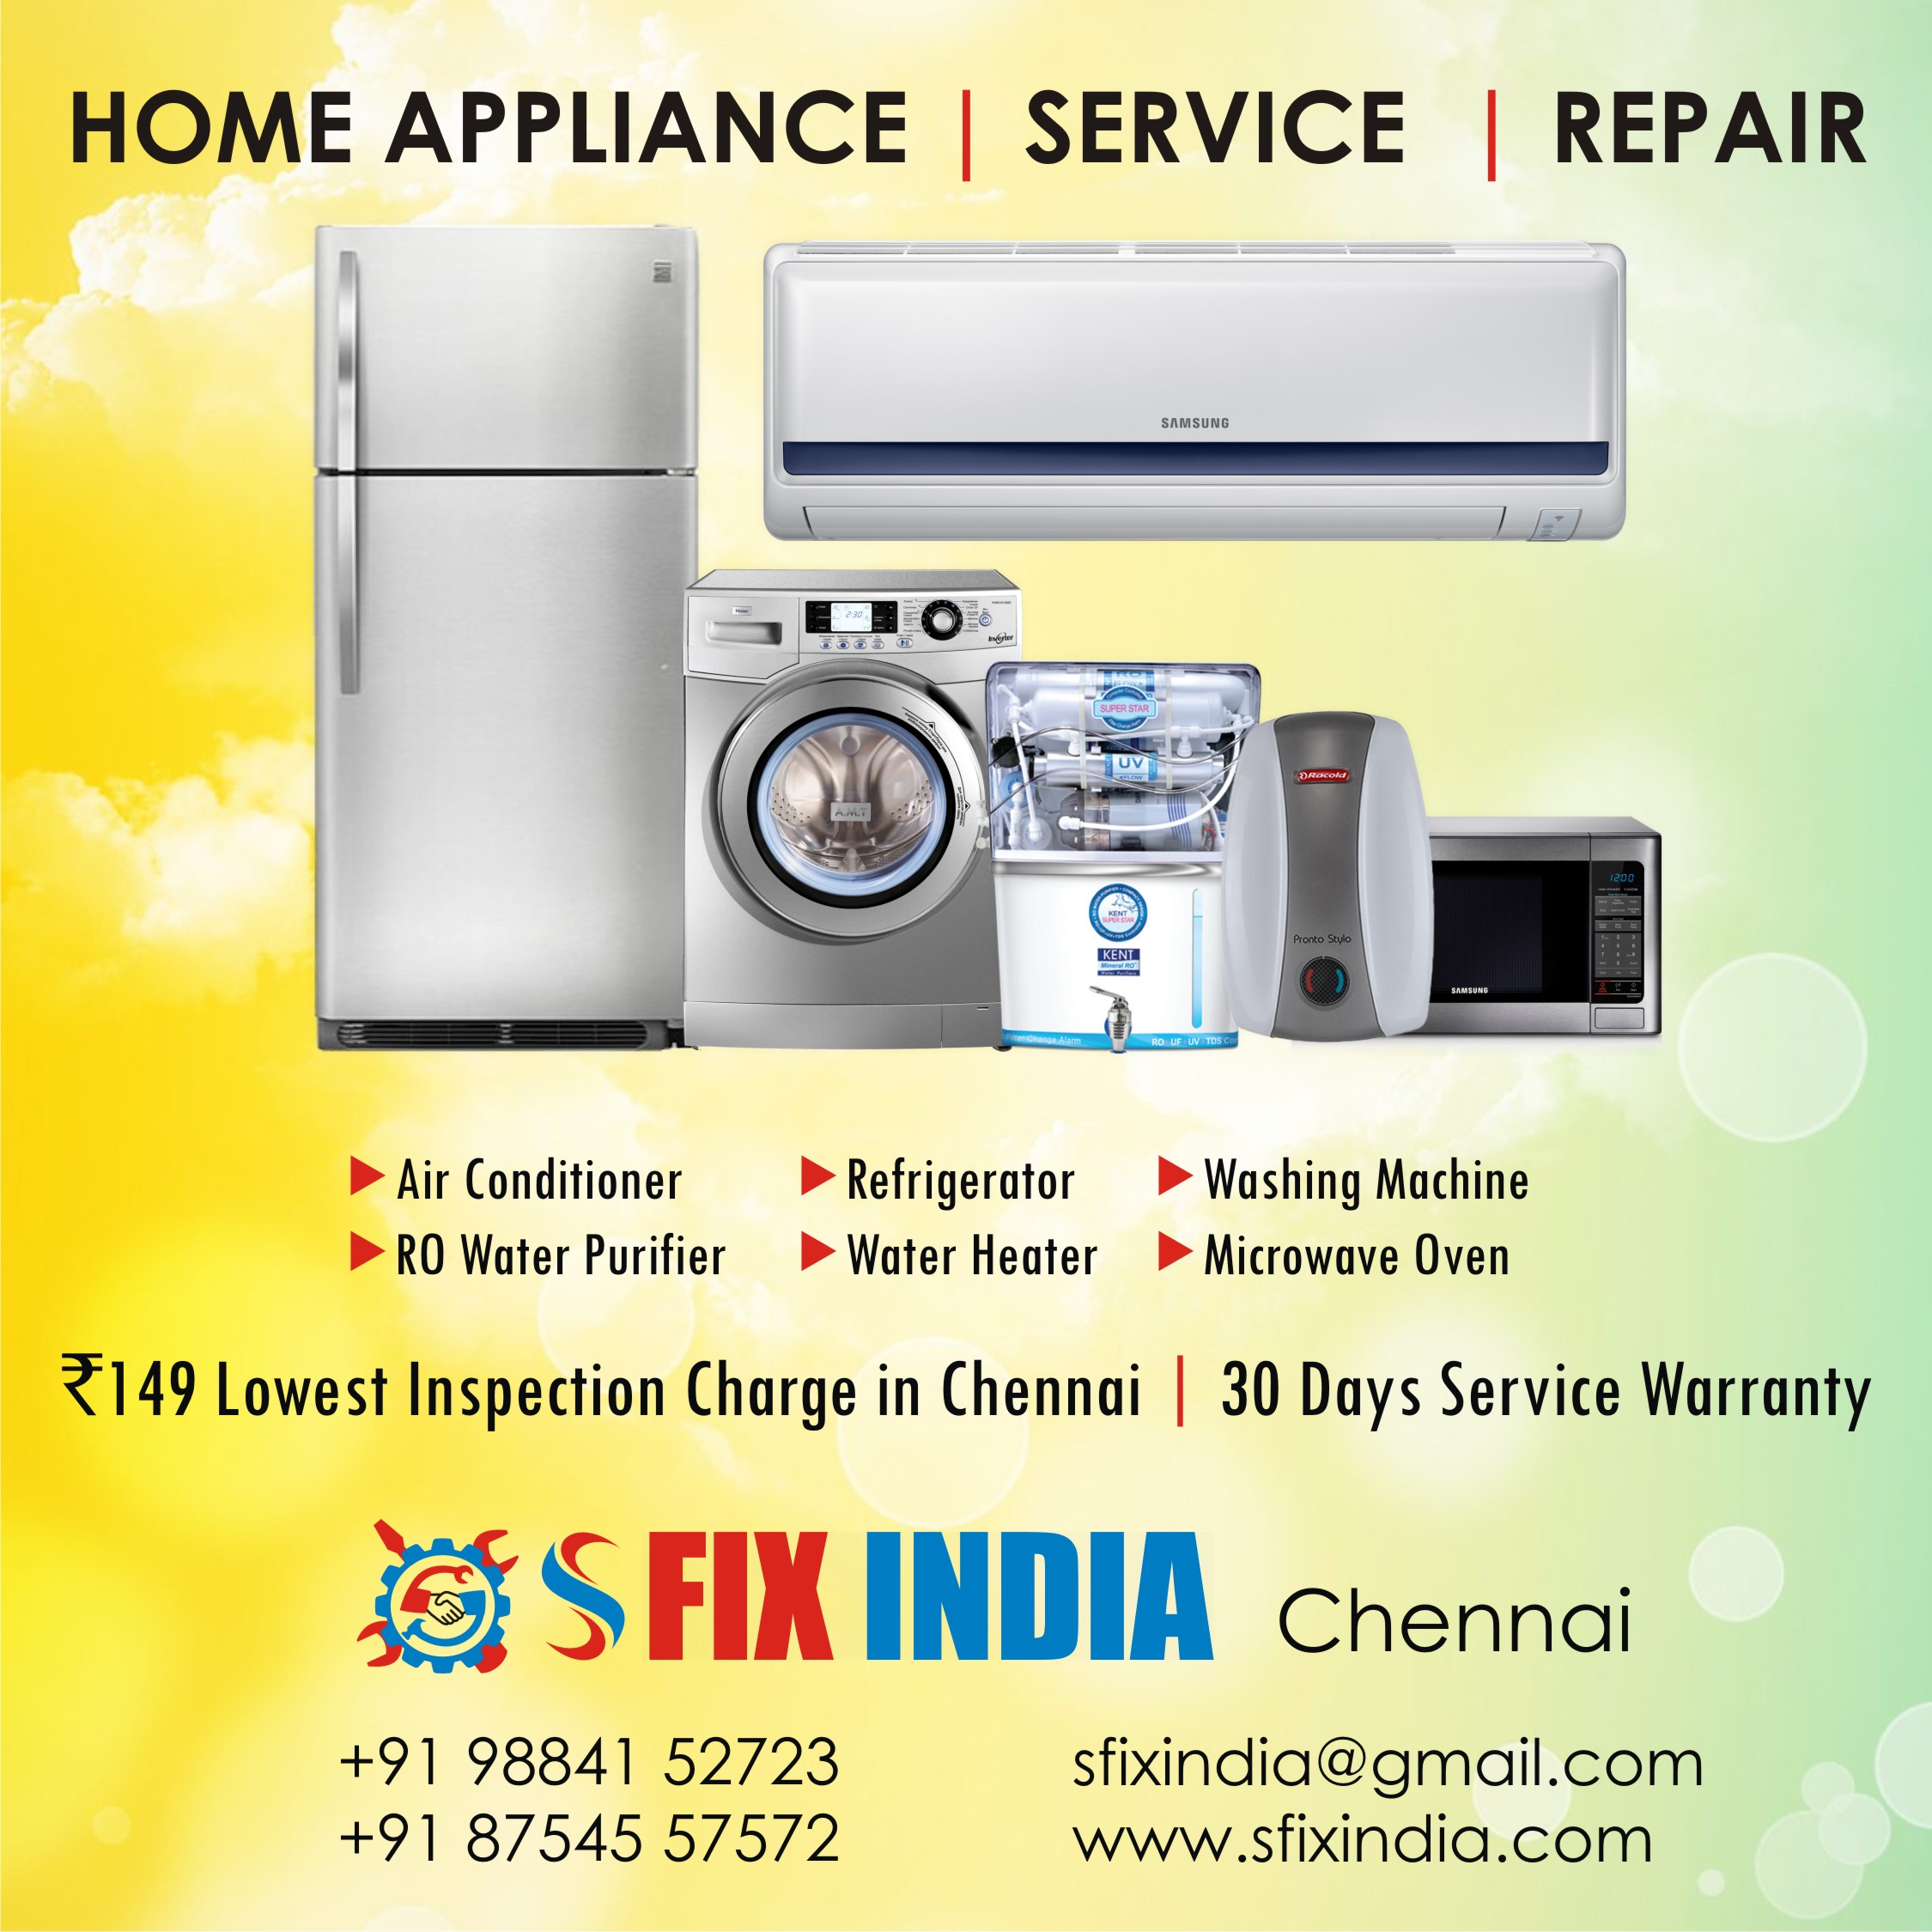  Home Appliance Repair Service  from SFix India